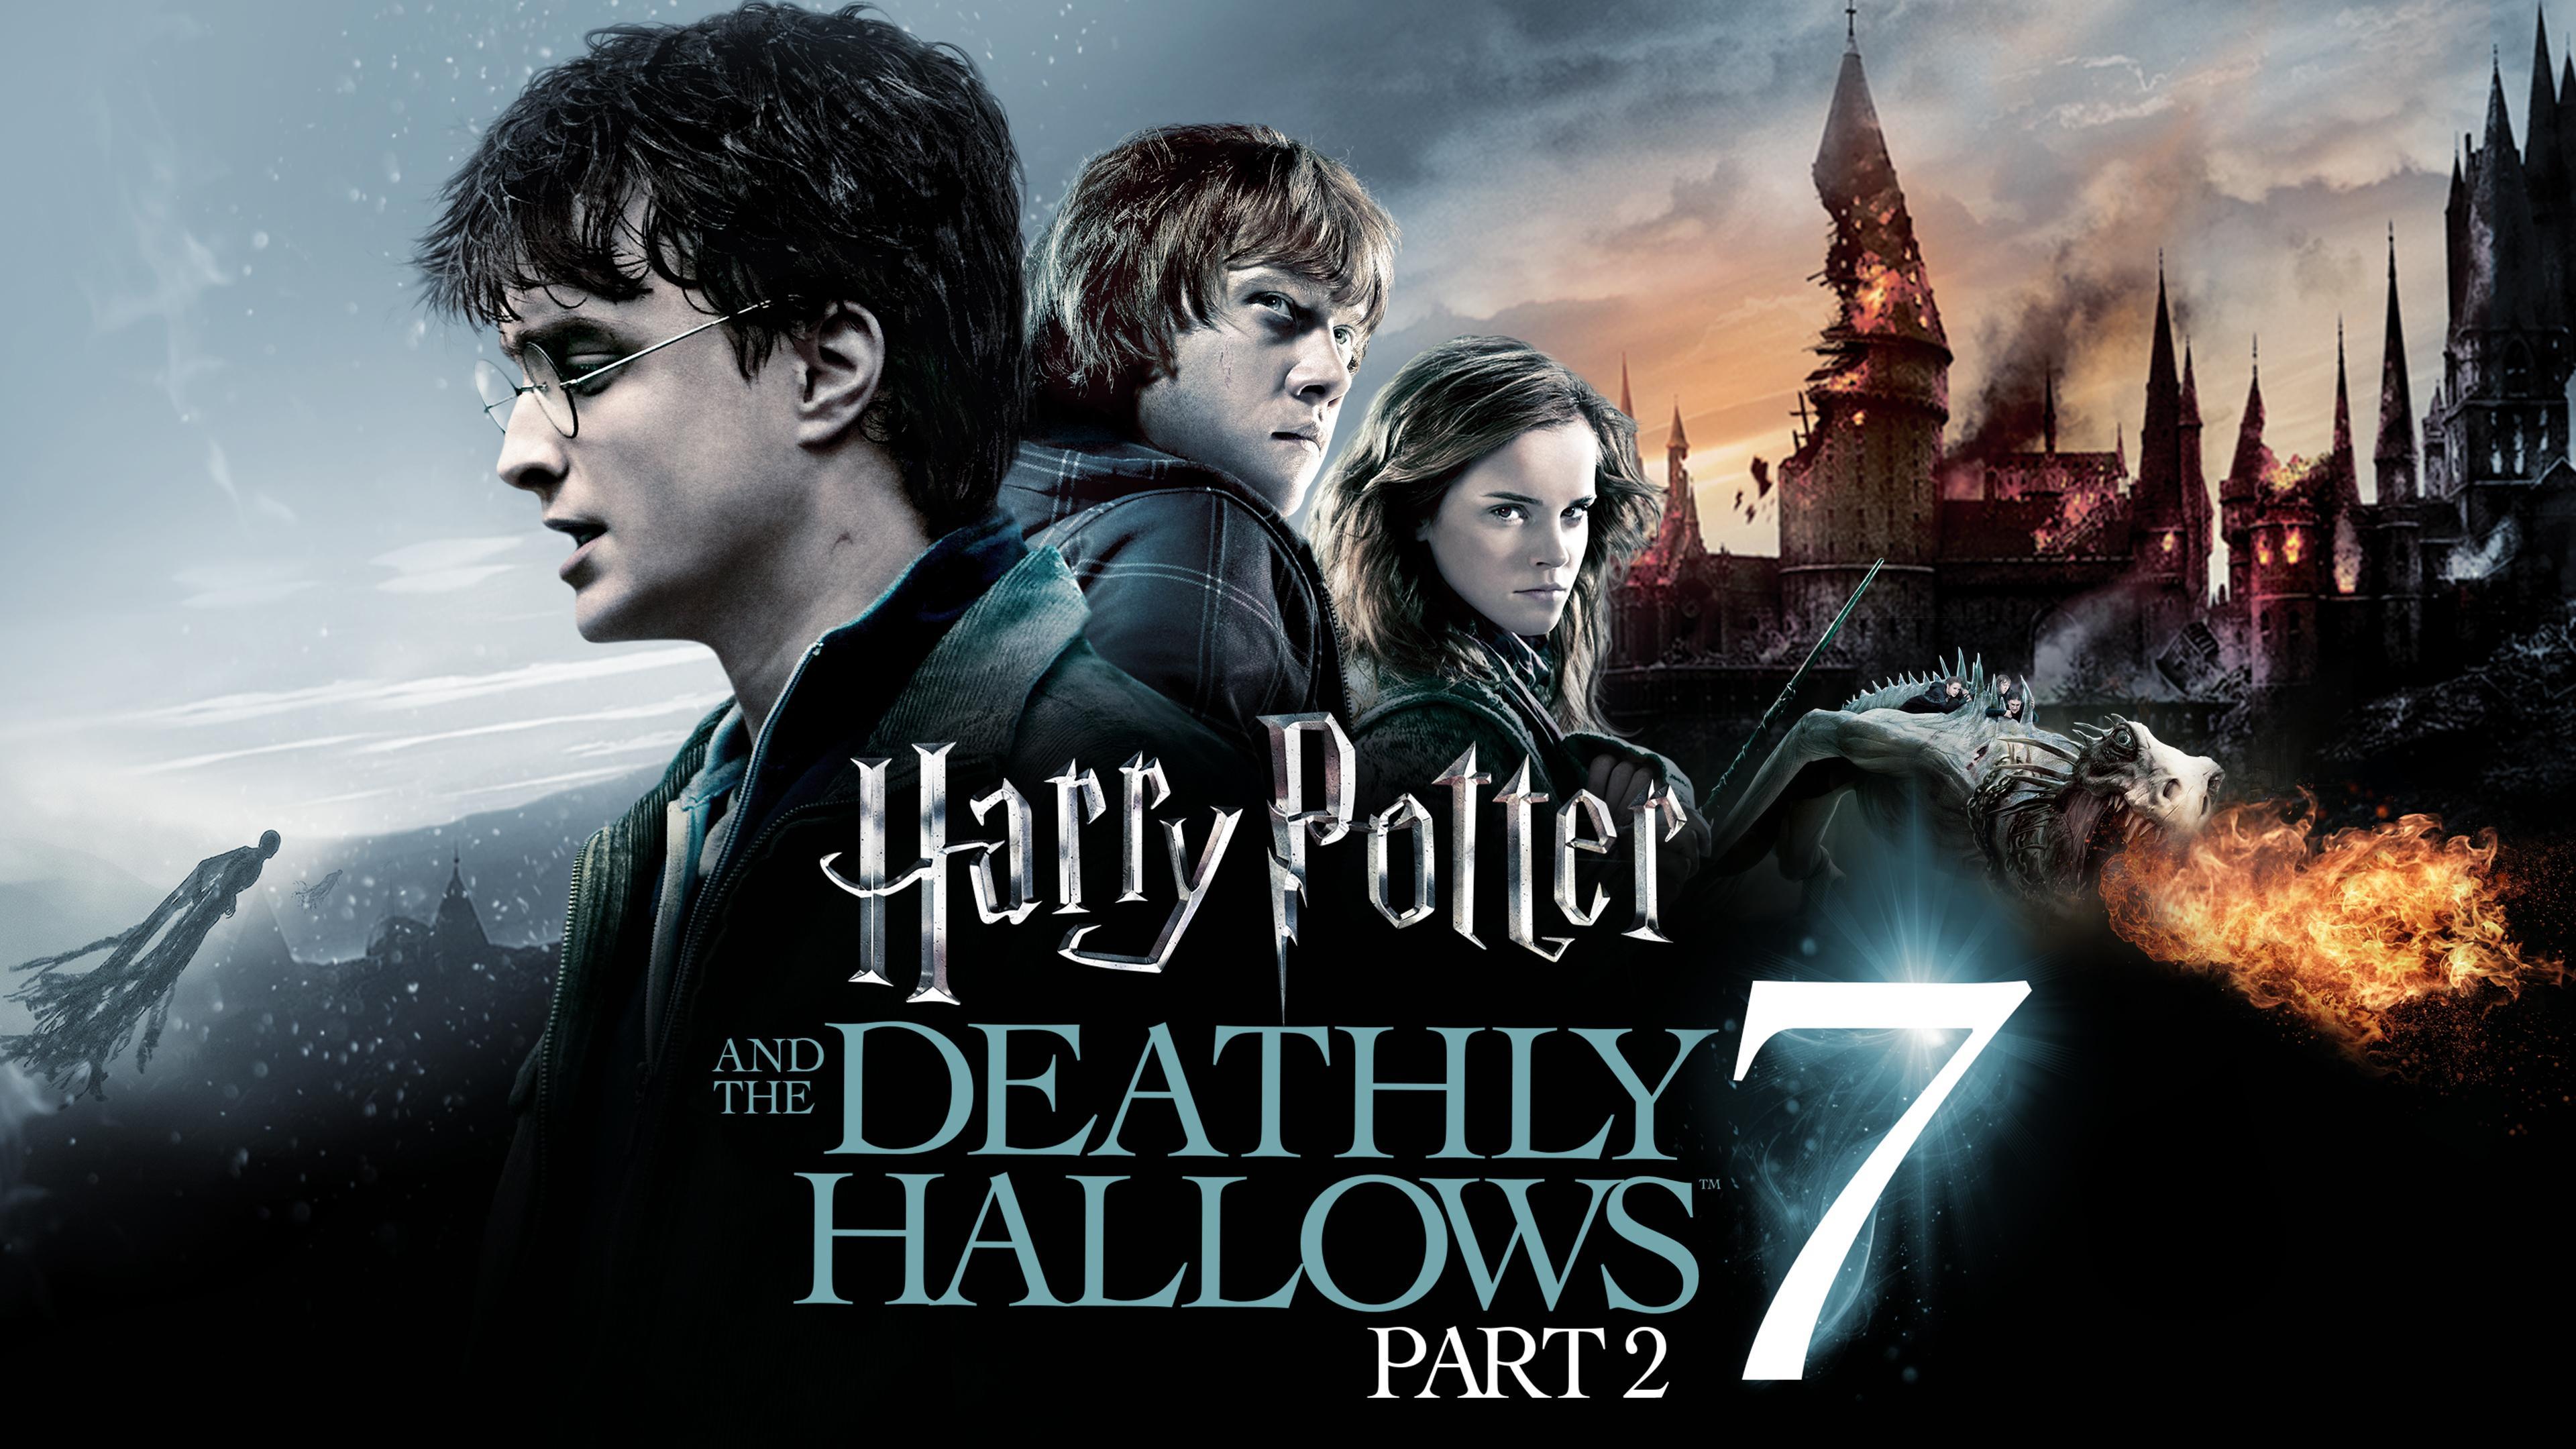 Harry Potter and the Deathly Hallows Part 2 Trivia